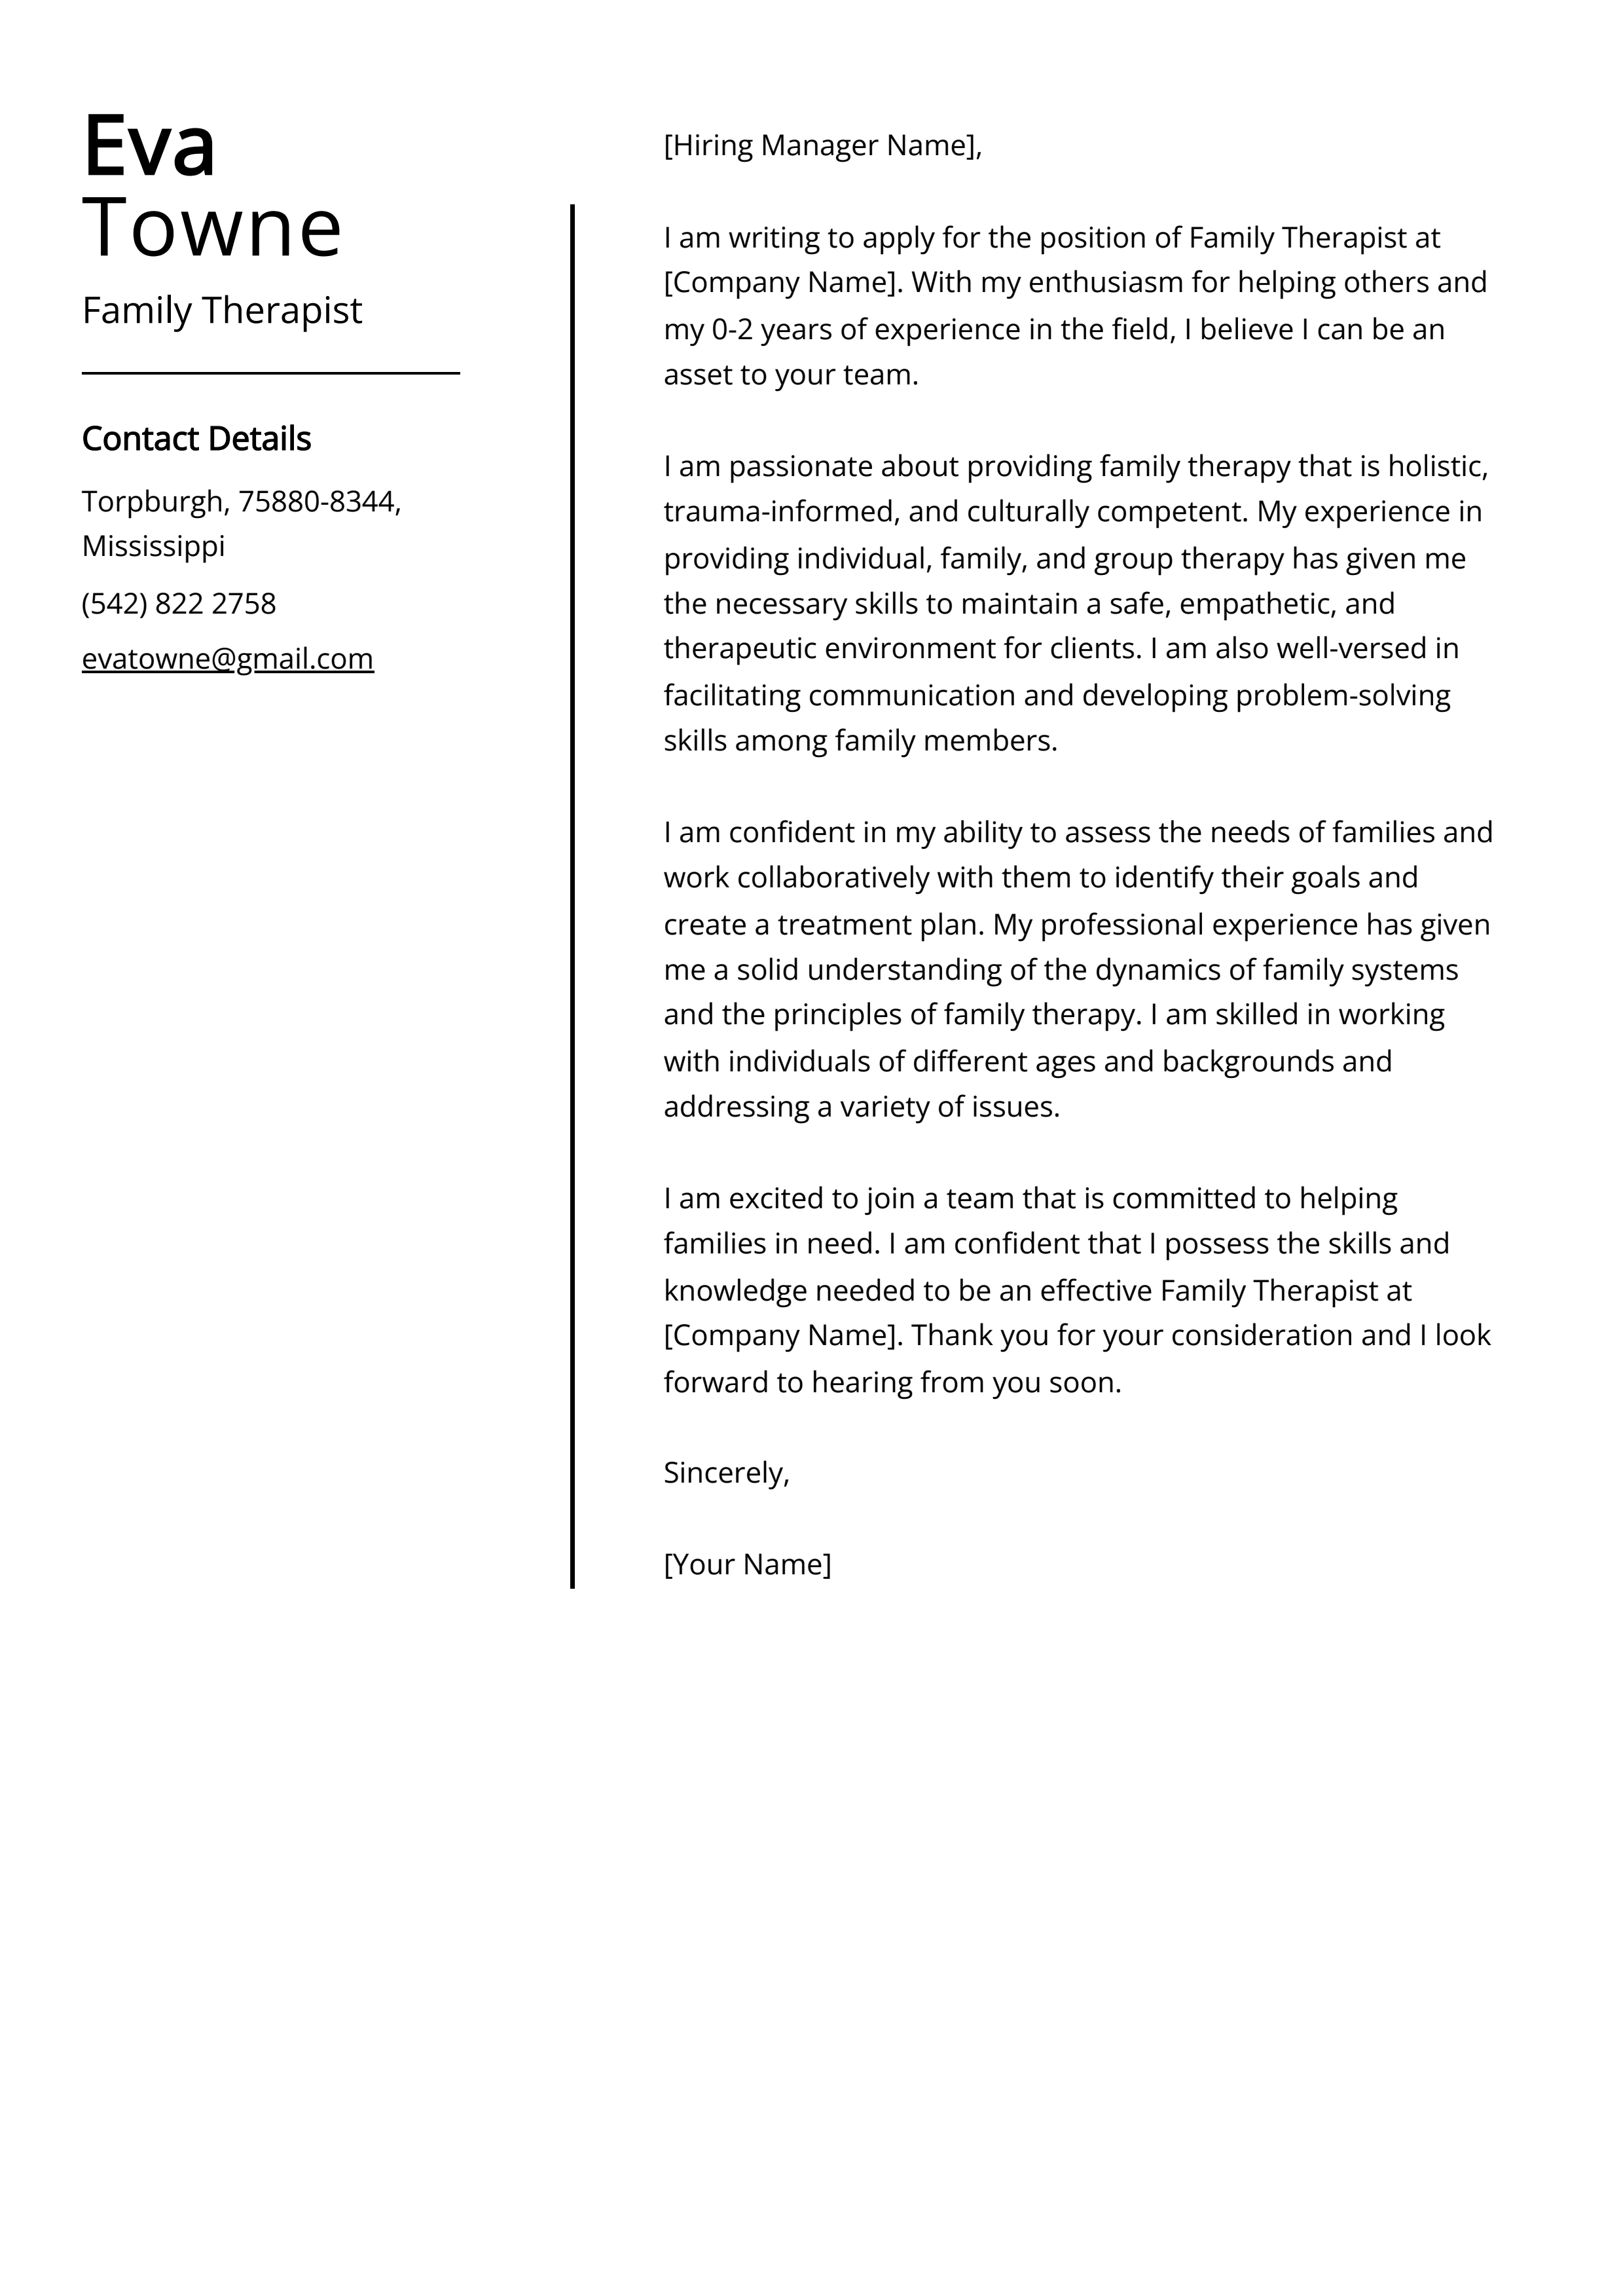 Family Therapist Cover Letter Example